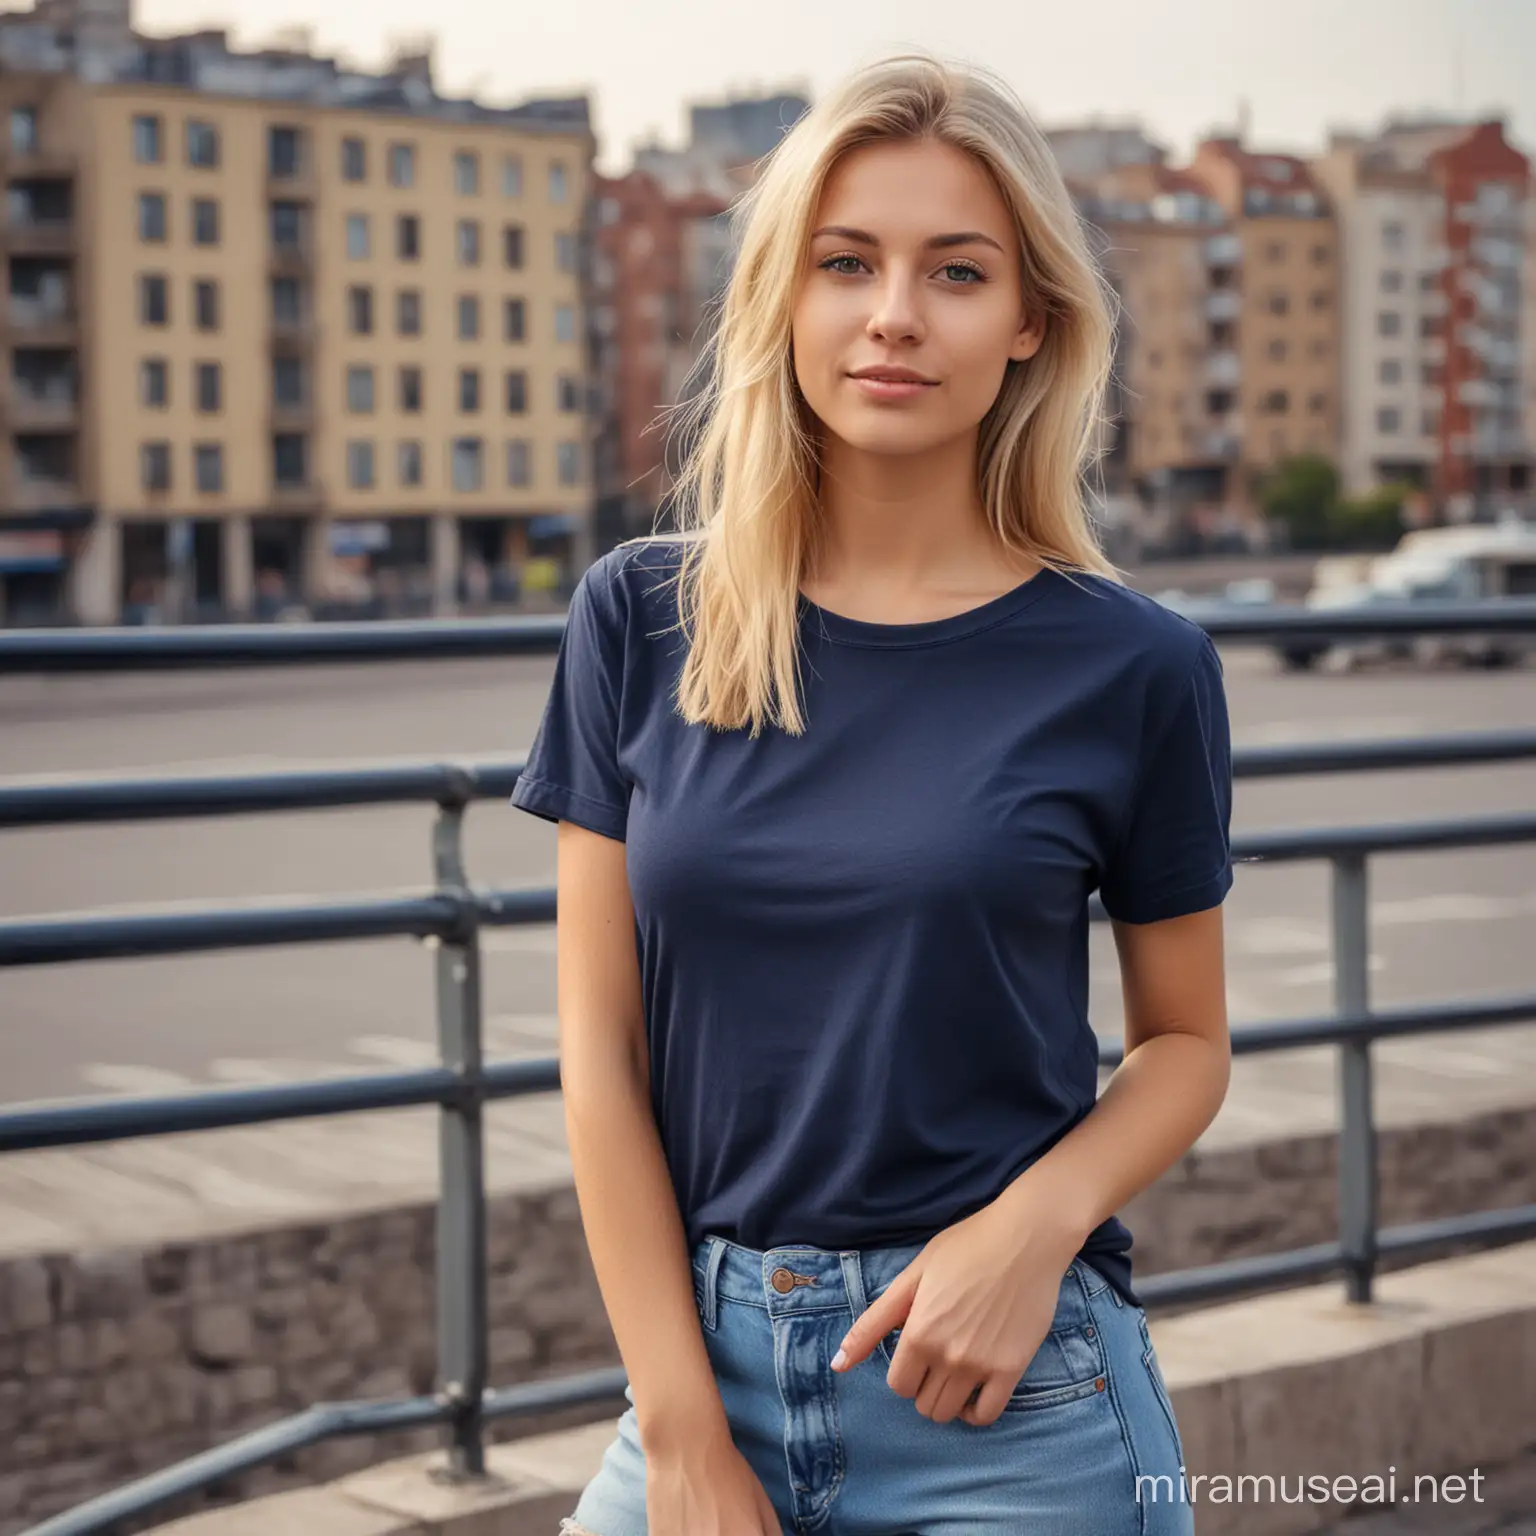 Young Blond Woman in Navy Blue TShirt Against Urban Background